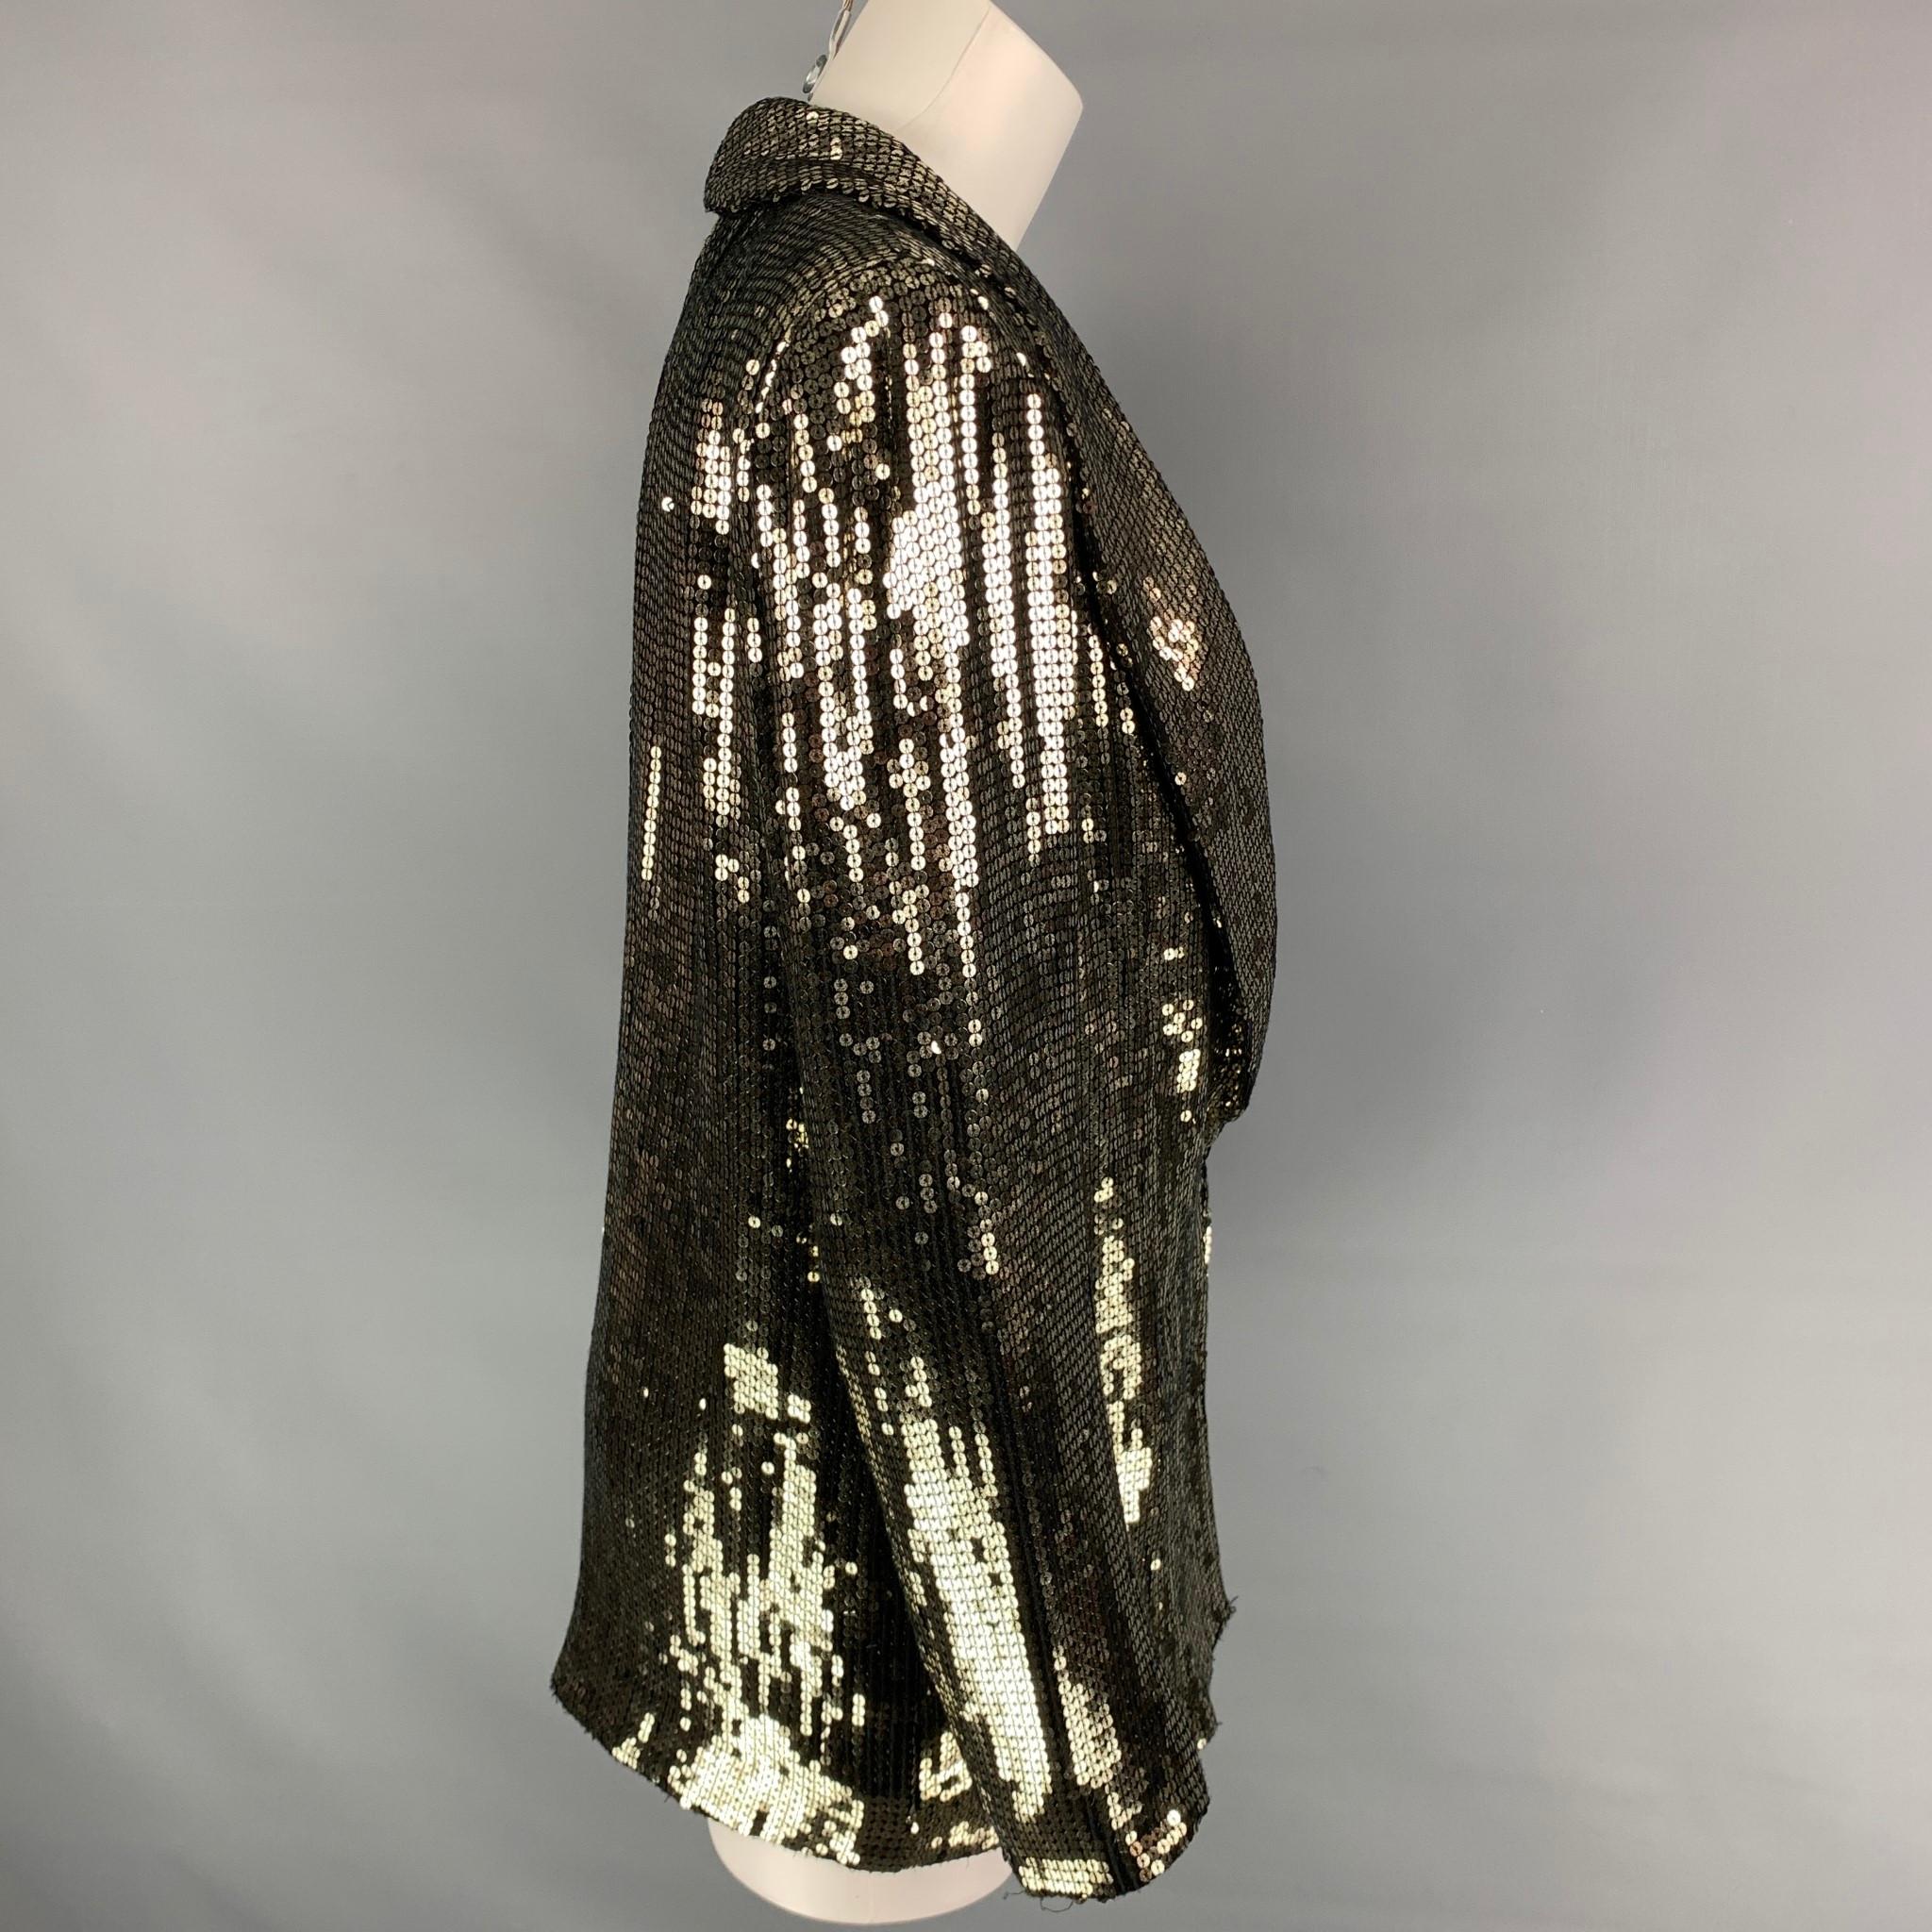 ALICE + OLIVIA jacket comes in a gold sequined viscose with a full liner featuring a shawl collar, slit pockets, and a double hook & loop closure. 

Very Good Pre-Owned Condition.
Marked: S
Original Retail Price: $595.00

Measurements:

Shoulder: 15